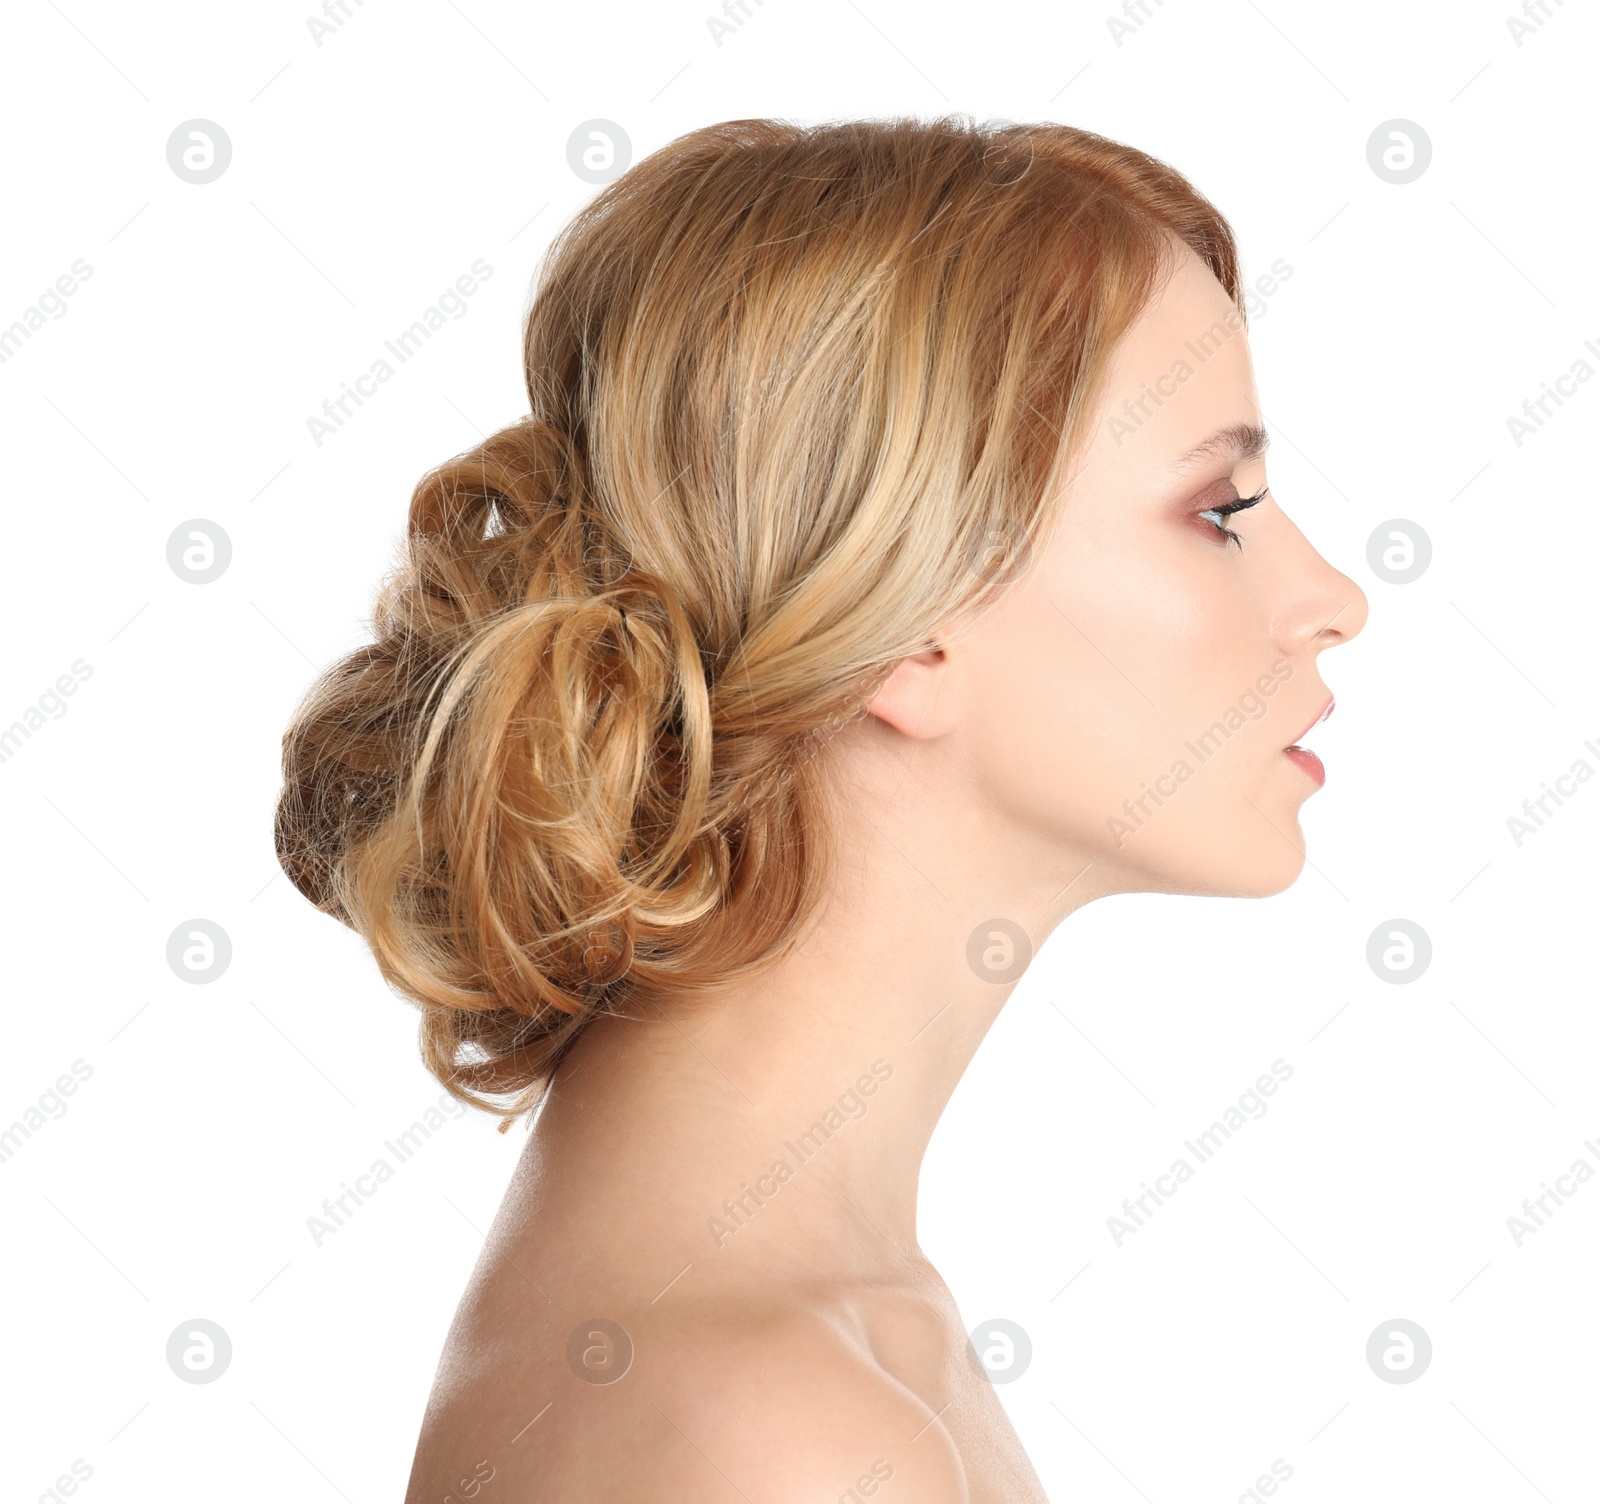 Photo of Portrait of beautiful woman with blonde hair on white background